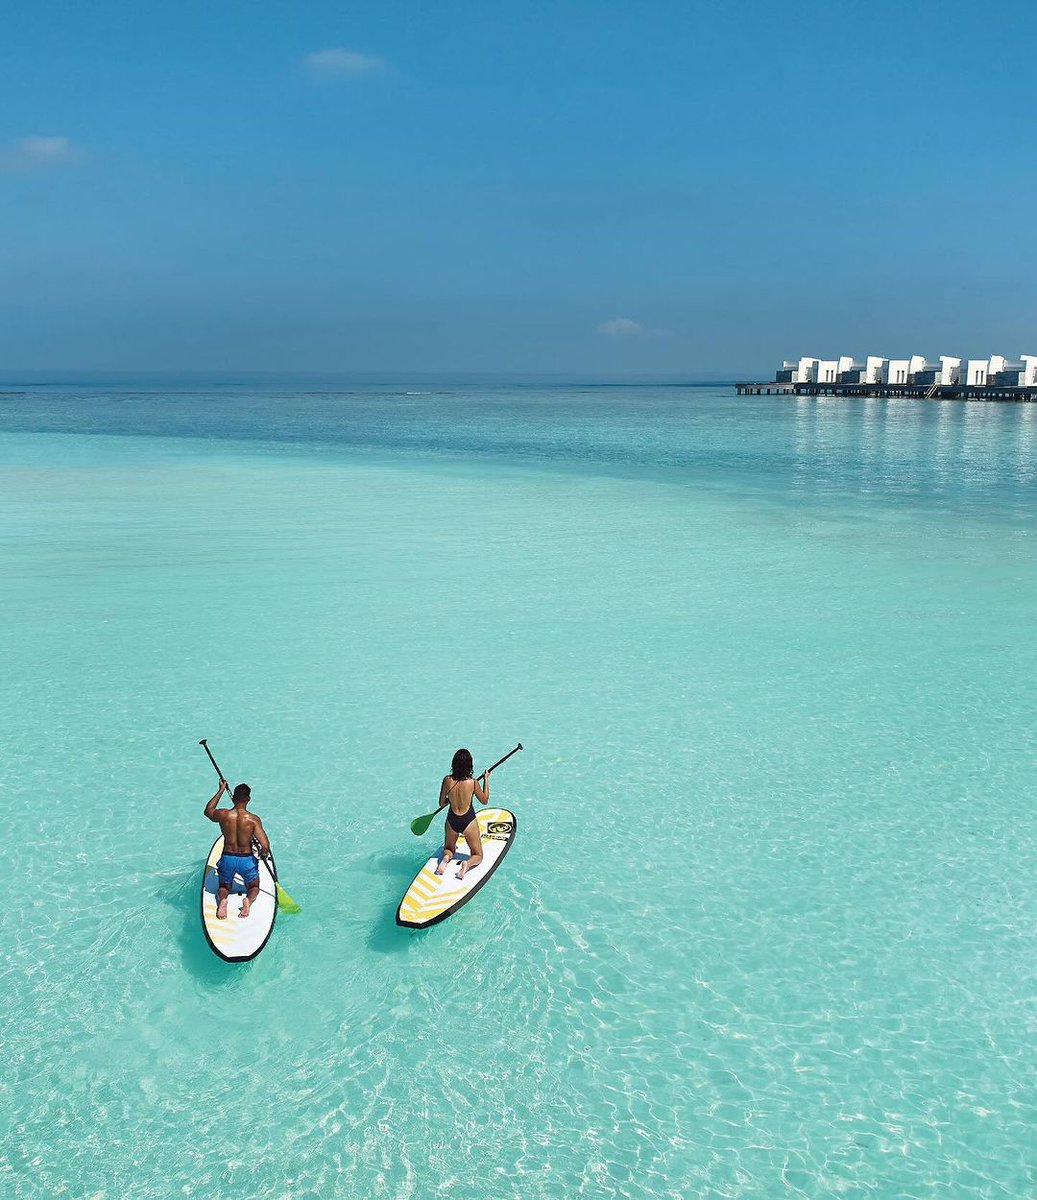 Glide through crystal-clear waters, surrounded by the stunning beauty of turquoise lagoons. 🌊✨

📸: Jumeirah Maldives

#MaldivesVirtualTour #Maldives #VisitMaldives #MustVisit #VacationMode #JumeirahMaldives #JumeirahHotels